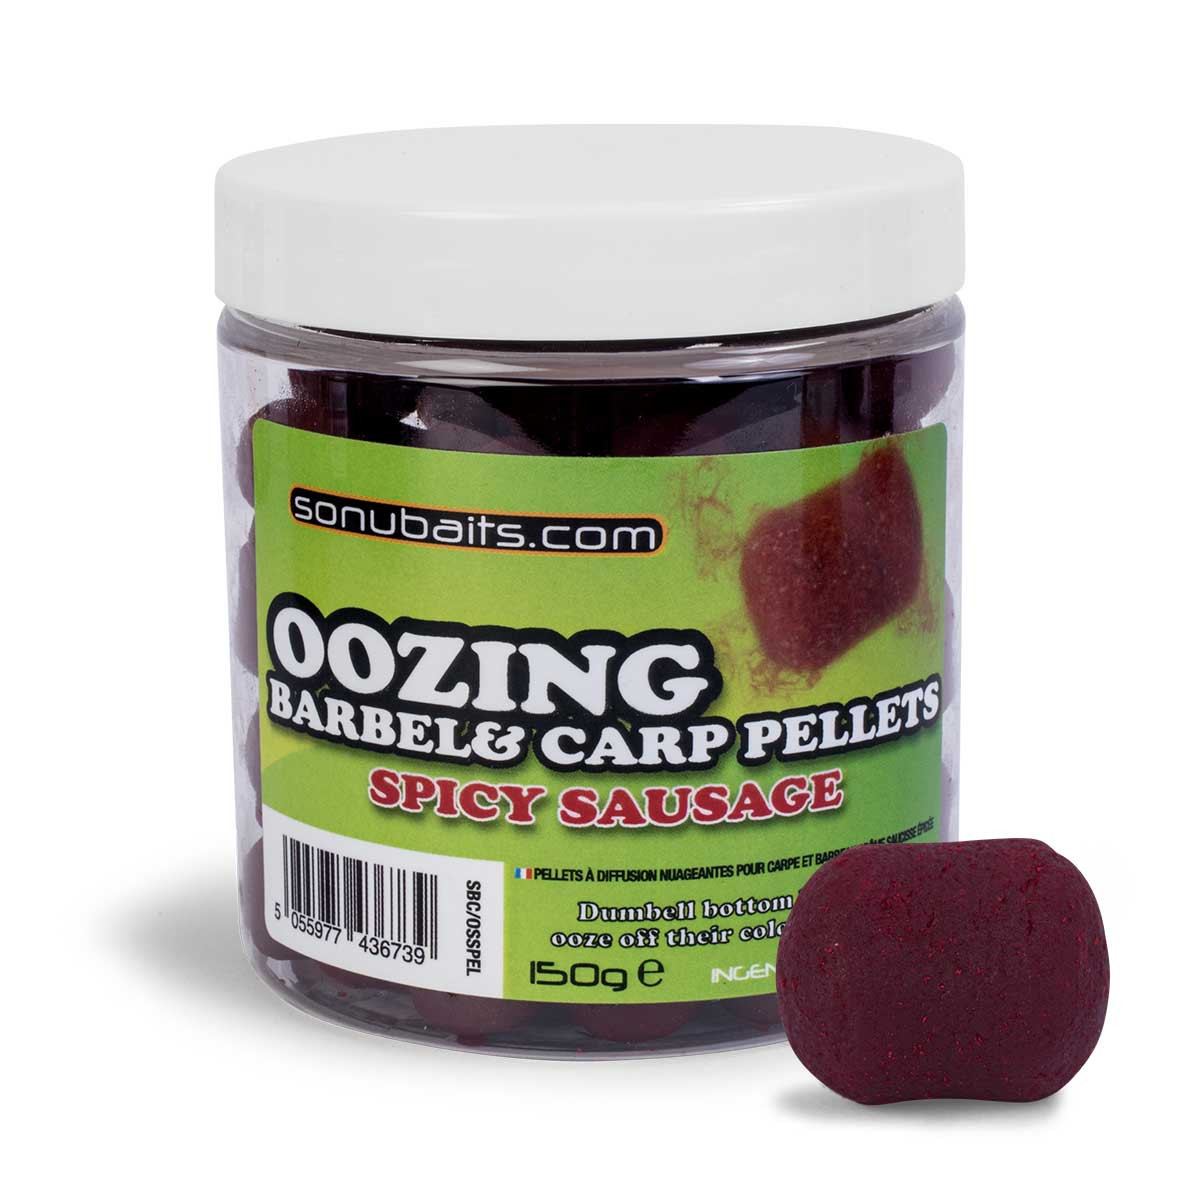 Sonu Baits Oozing Barbel & Carp Pellets Spicy Sausage - Click Image to Close